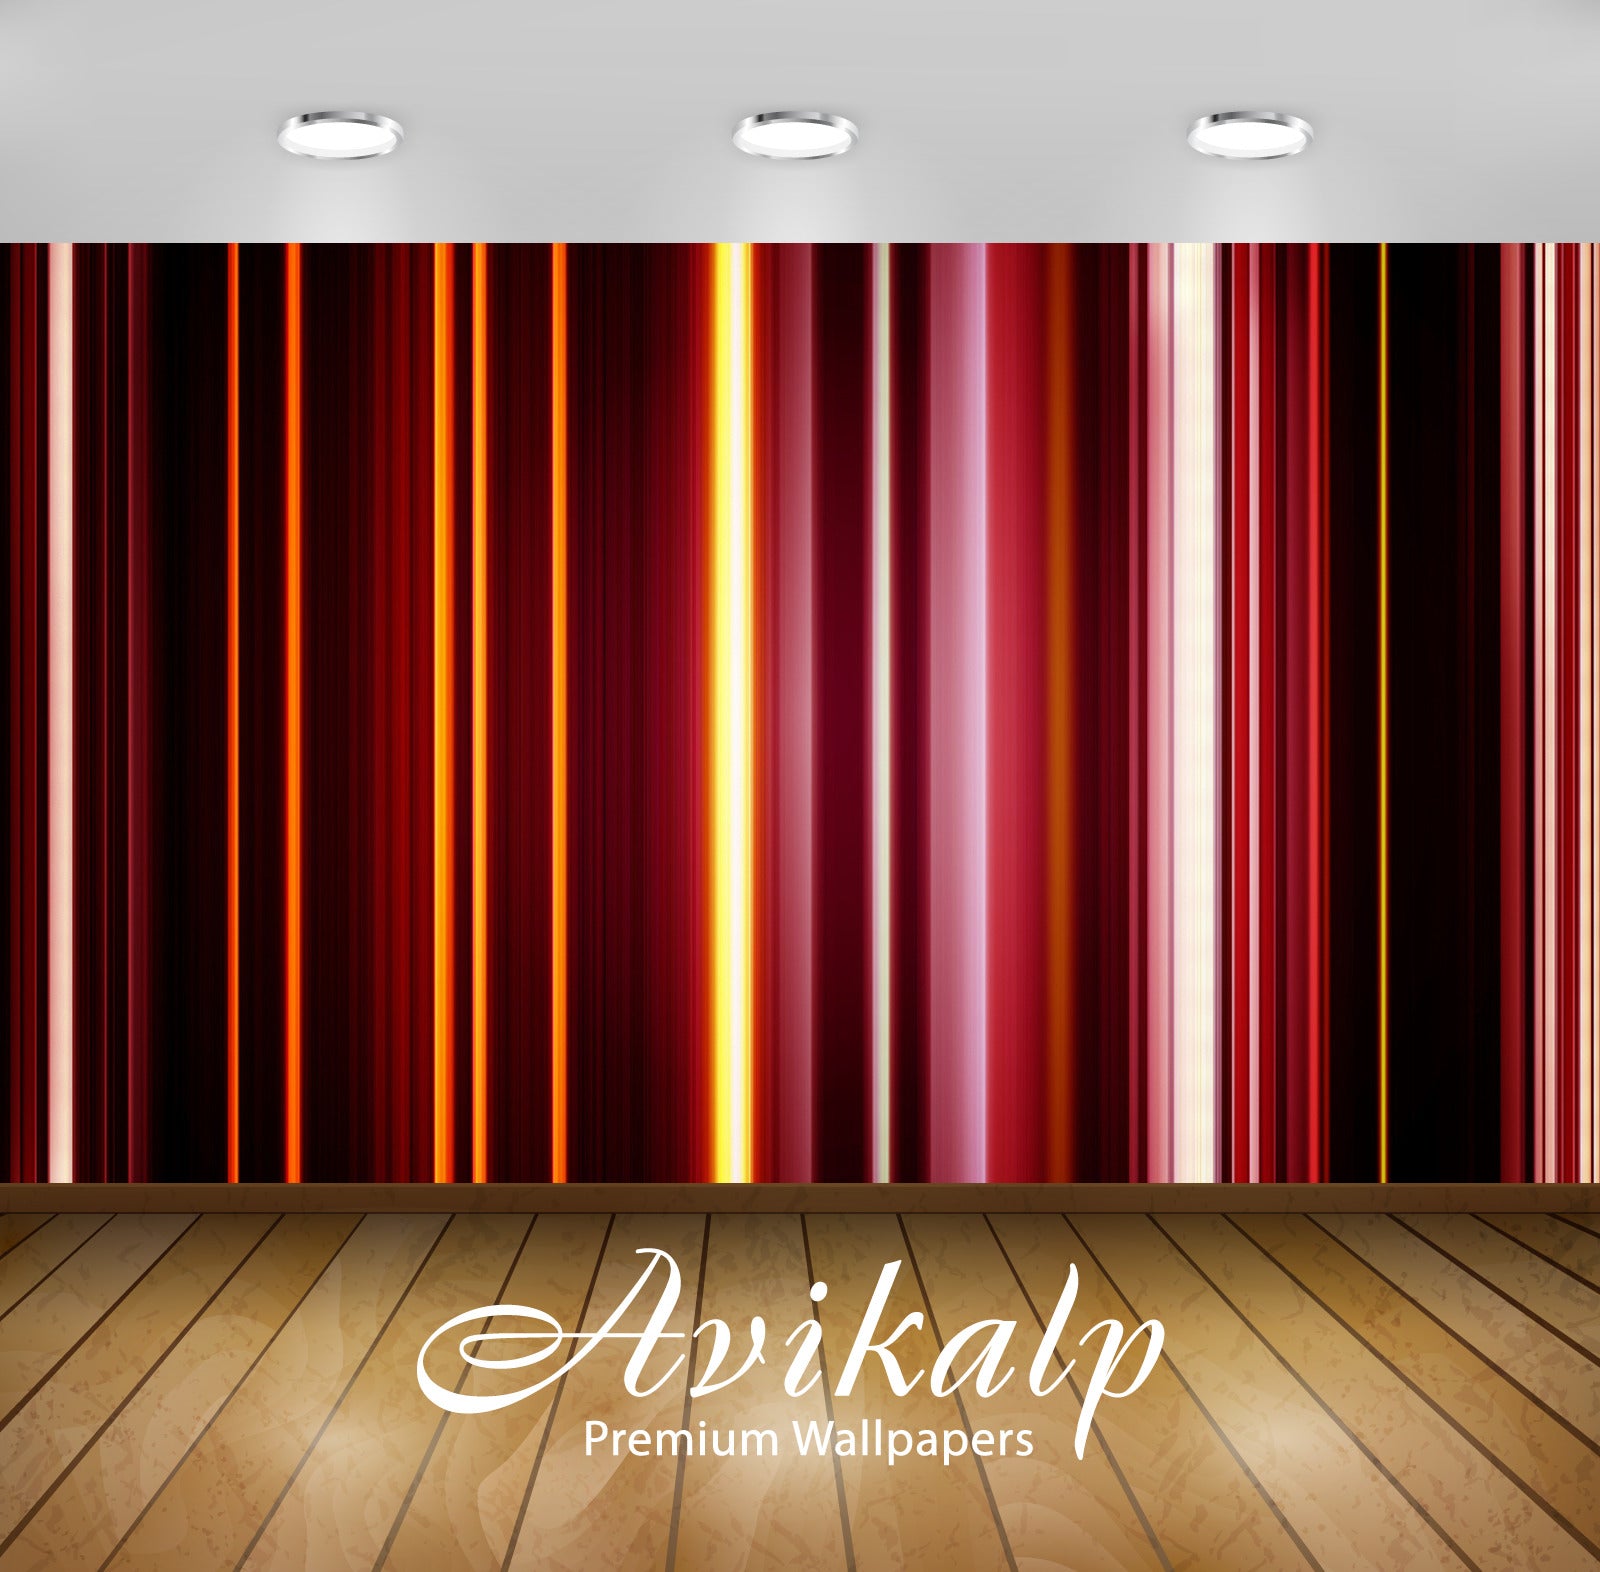 Avikalp Exclusive Awi4095 Bright Stripes Full HD Wallpapers for Living room, Hall, Kids Room, Kitche